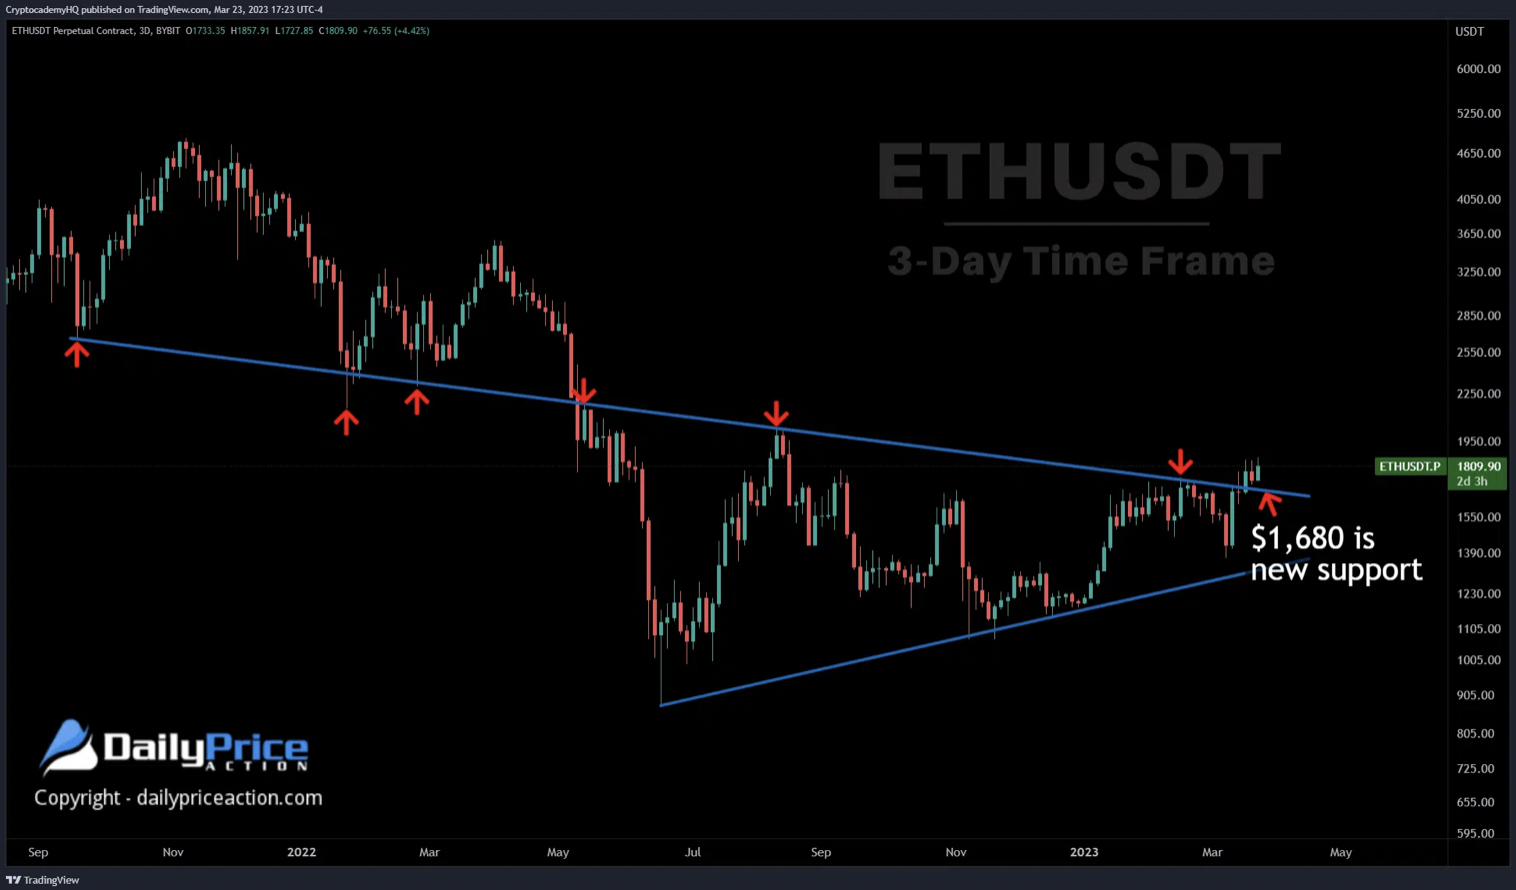 ETHUSDT Perpetual Contract